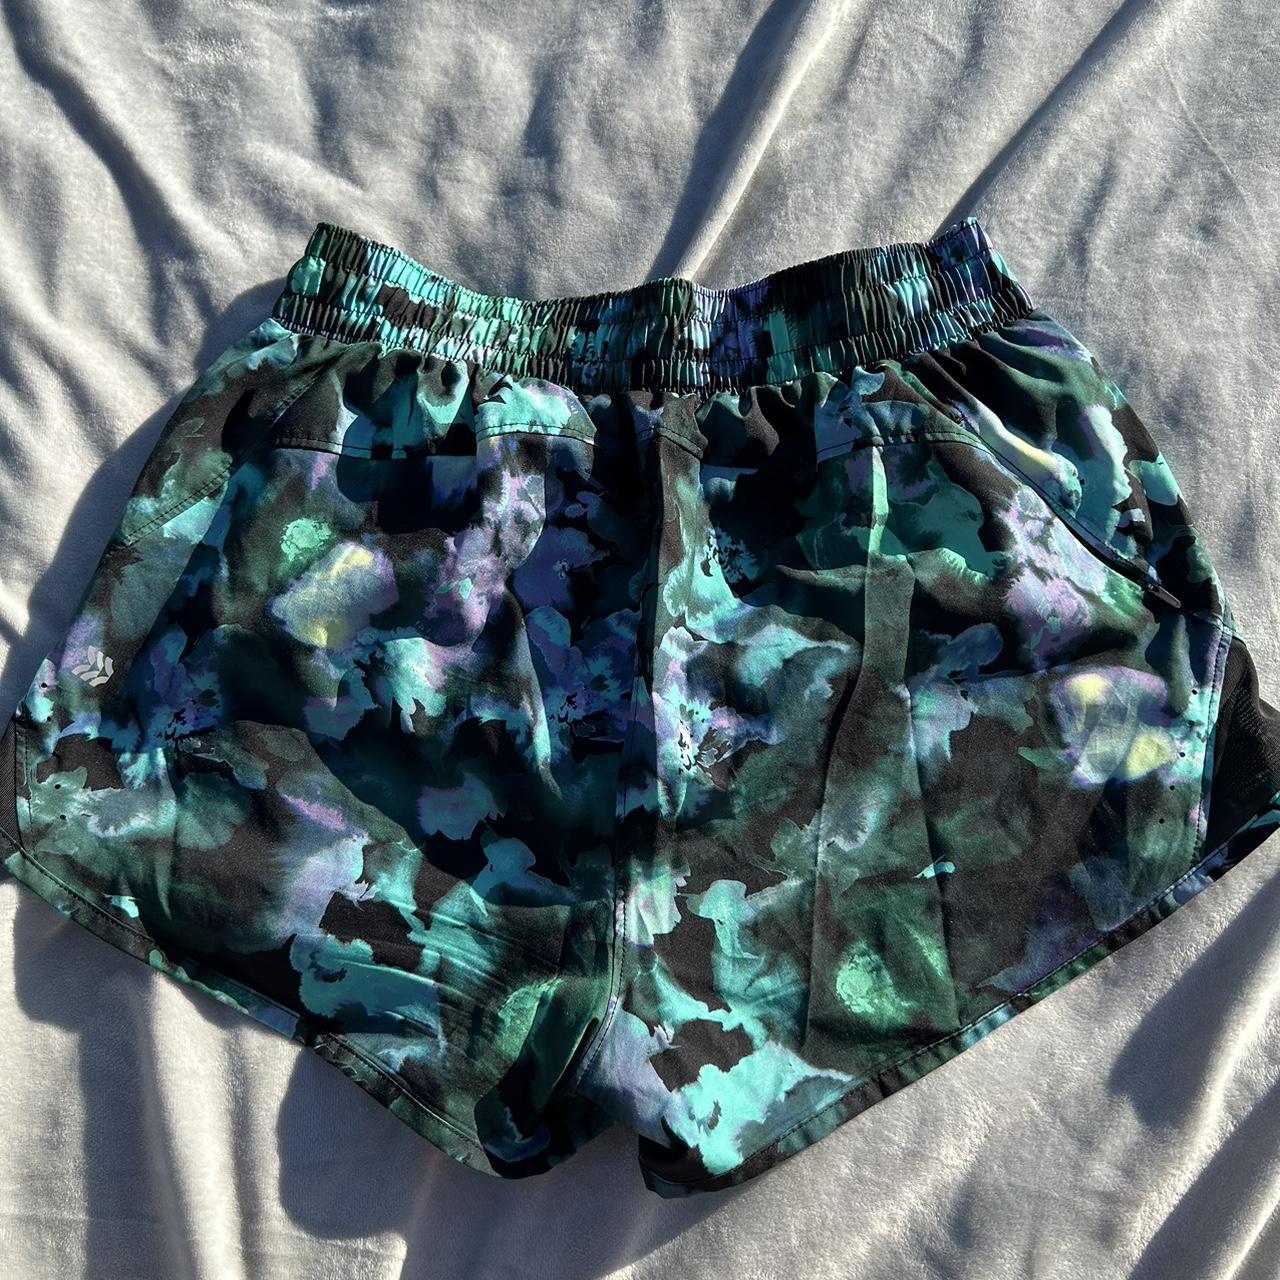 7” Seam All in Motion Shorts - pretty new - Wore a - Depop